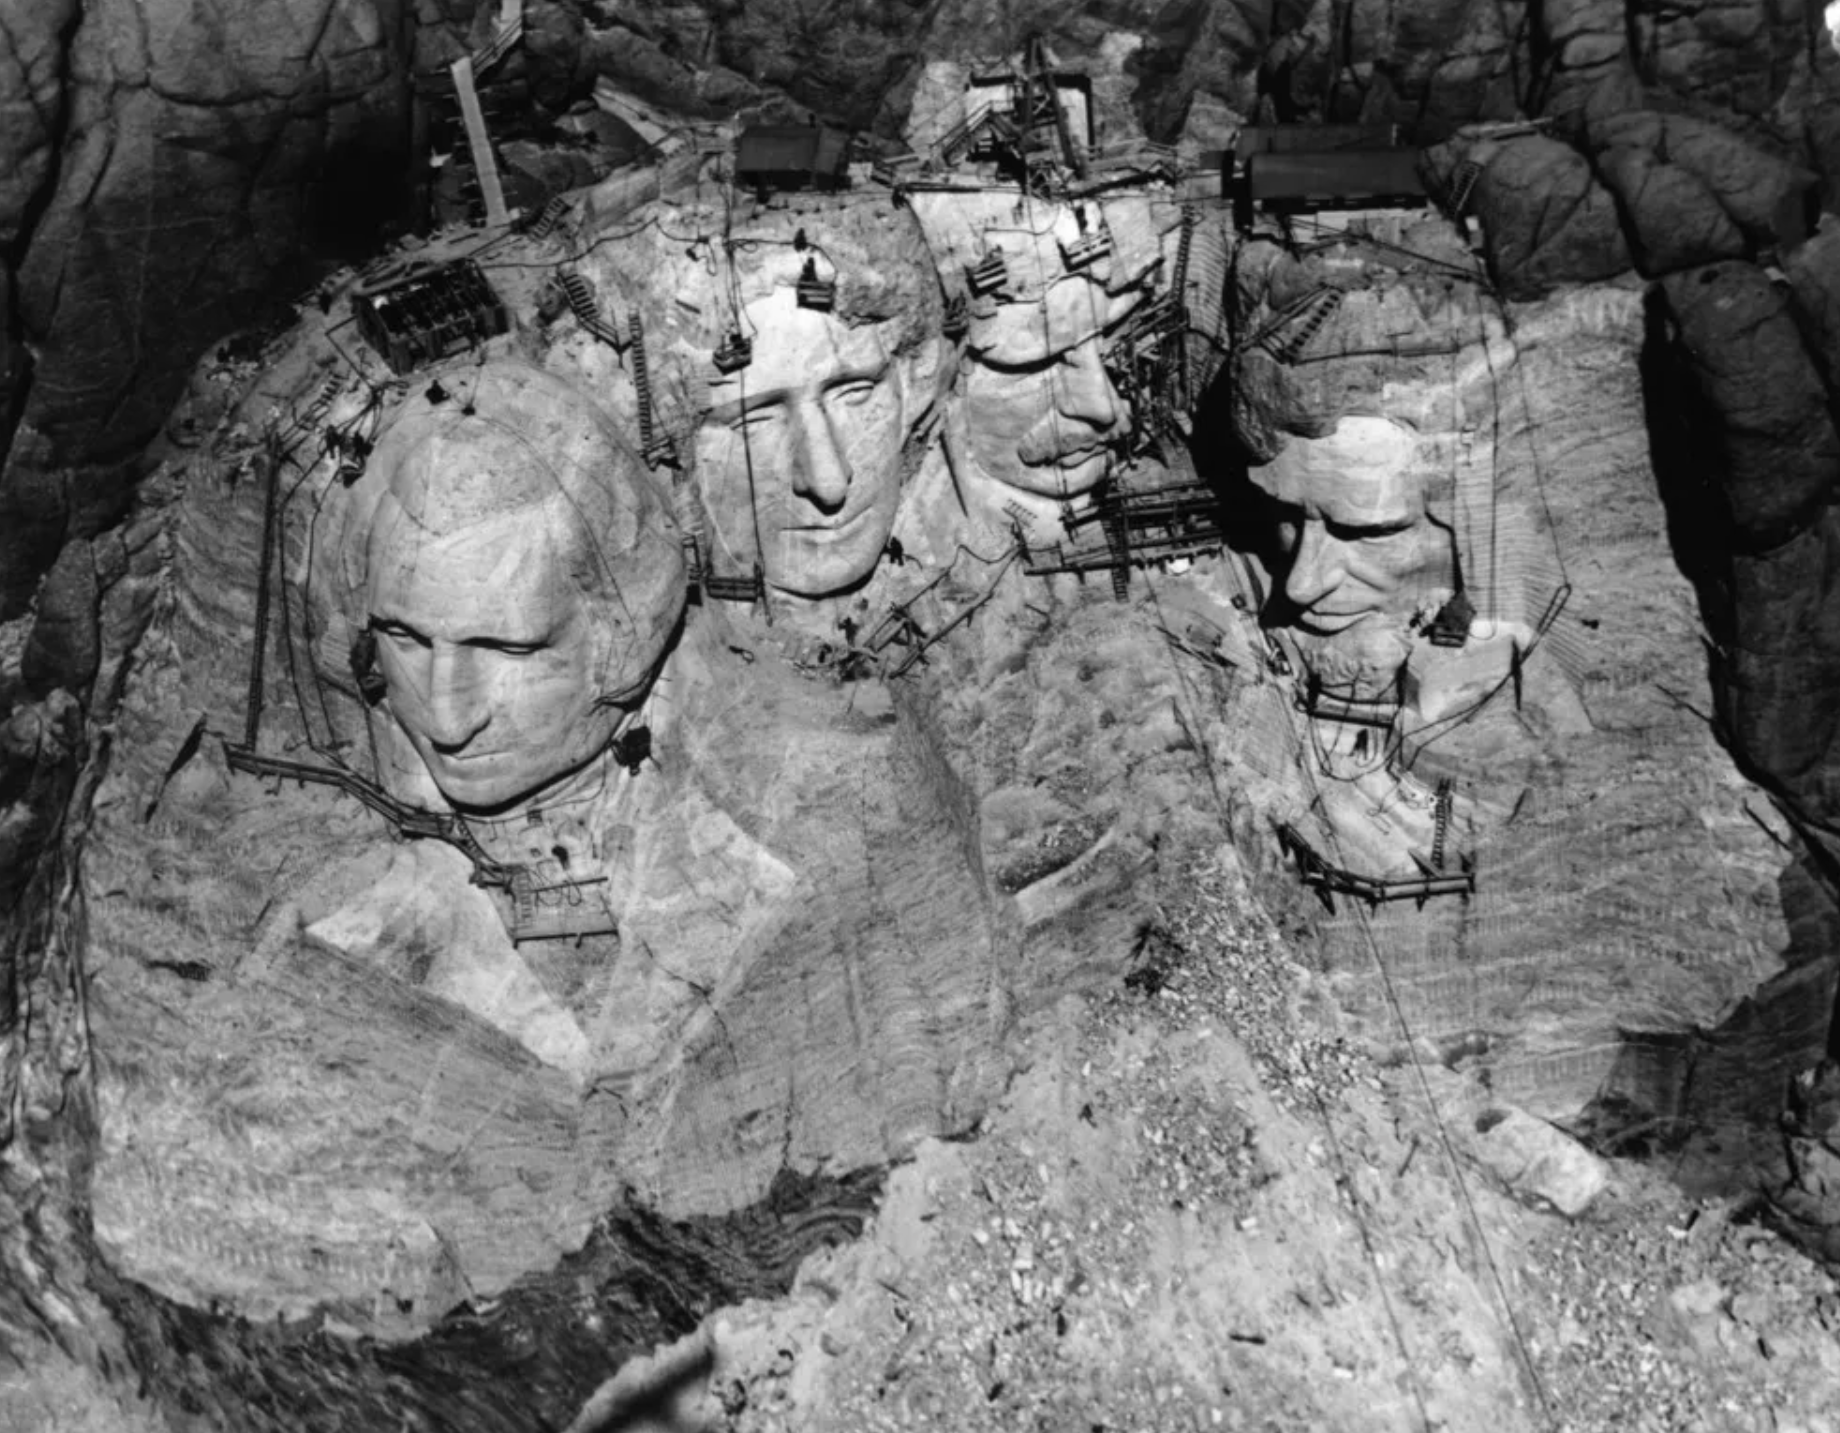 mount rushmore workers